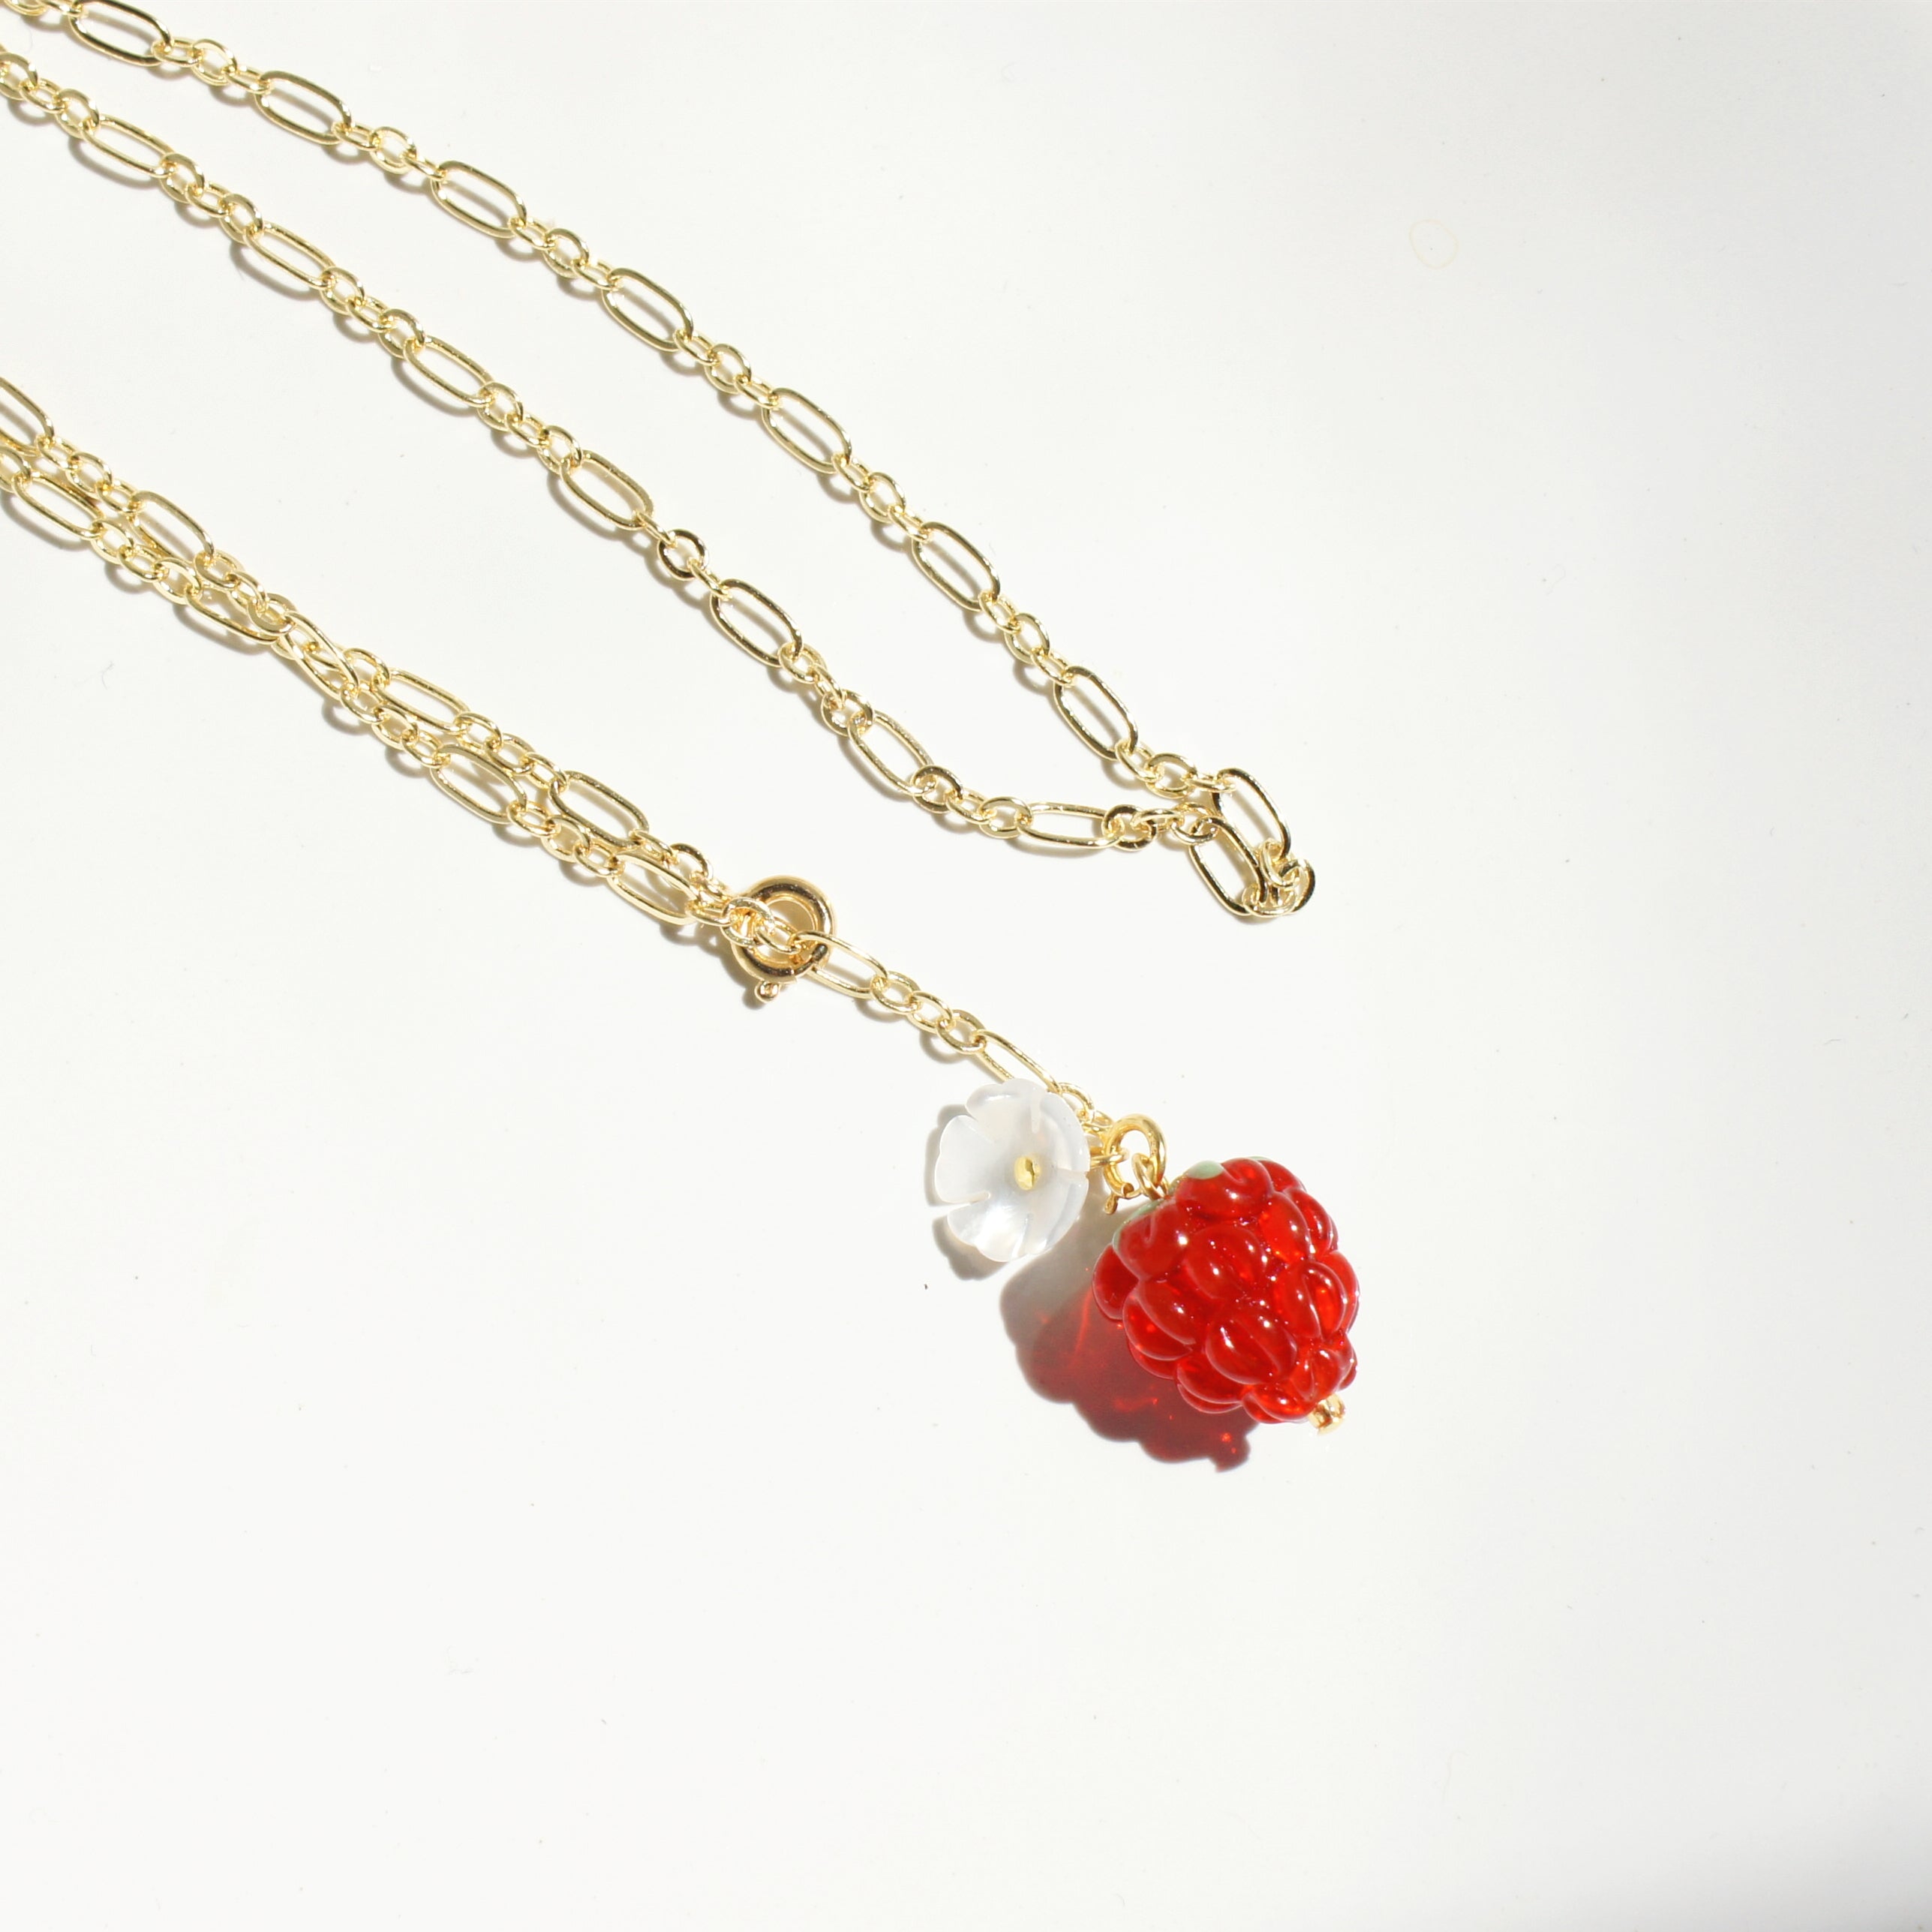 Very Berry Chain Necklace with Lampwork Glass Raspberry Pendant